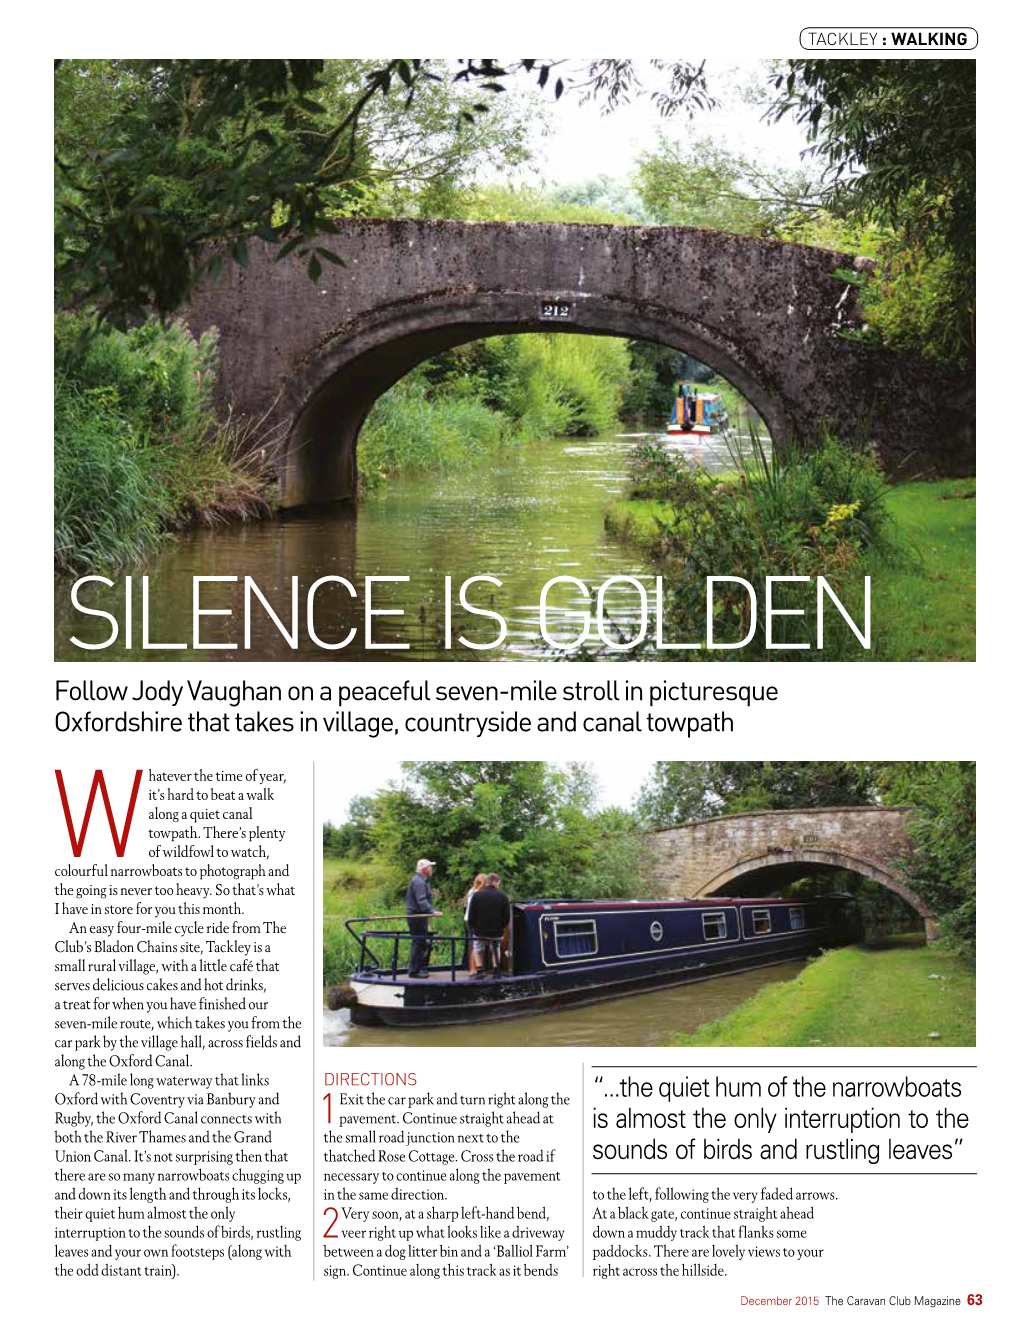 SILENCE IS GOLDEN Follow Jody Vaughan on a Peaceful Seven-Mile Stroll in Picturesque Oxfordshire That Takes in Village, Countryside and Canal Towpath